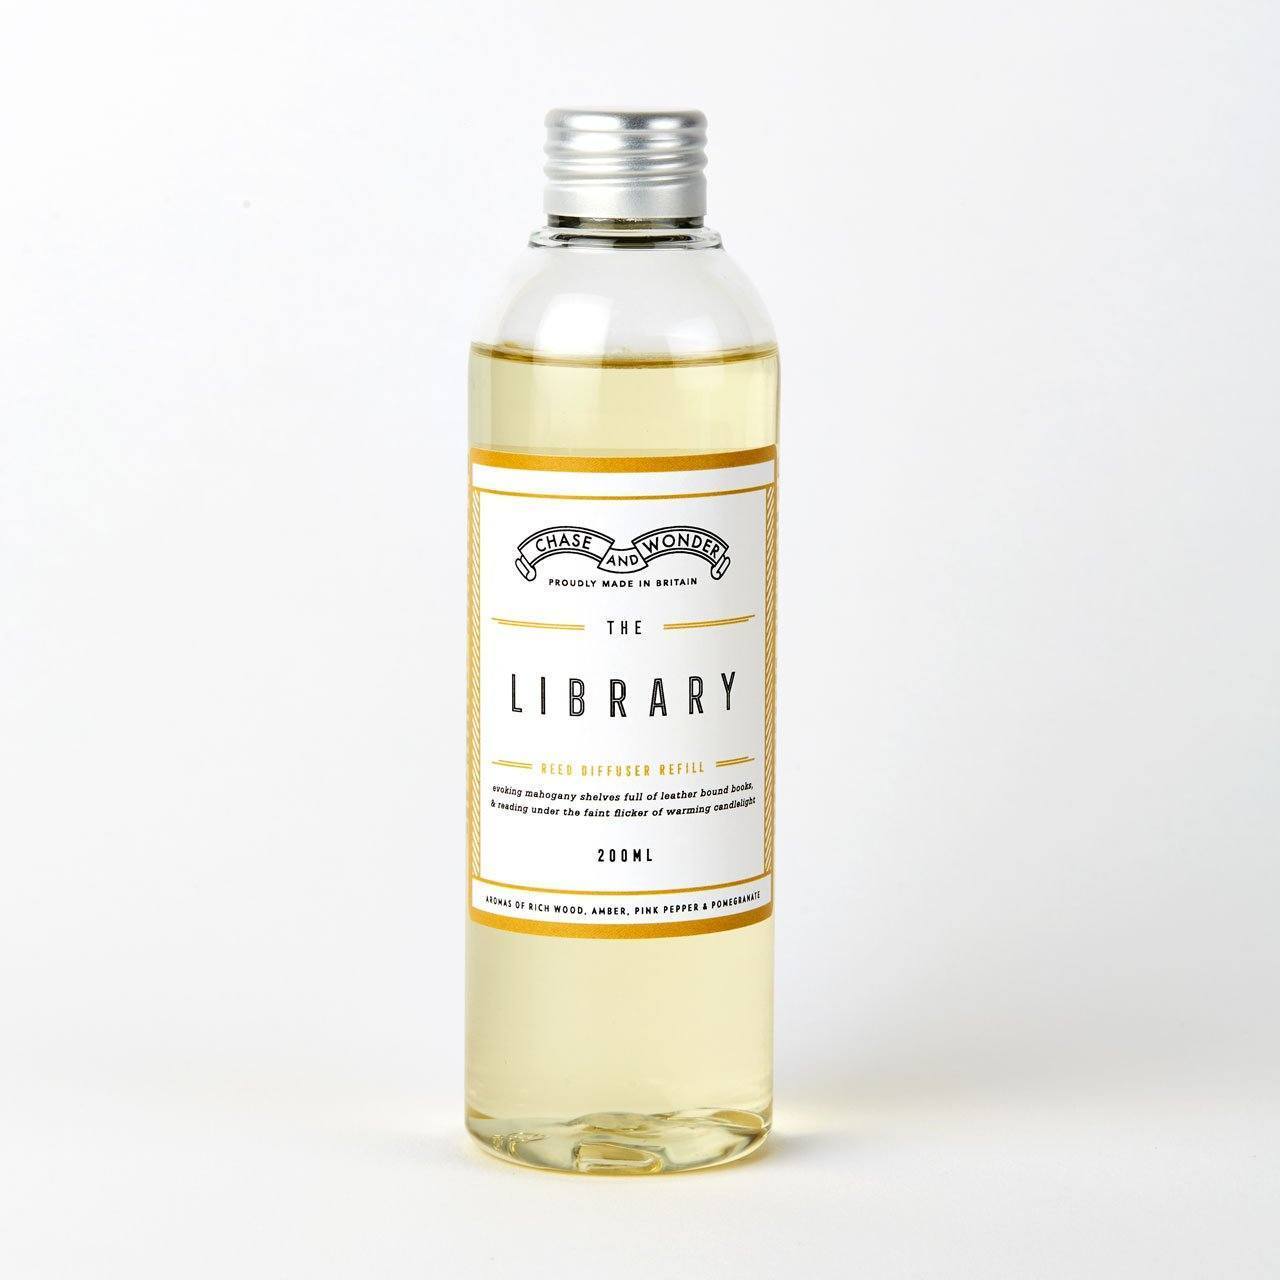 The Library Reed Diffuser Refill - Chase and Wonder - Proudly Made in Britain